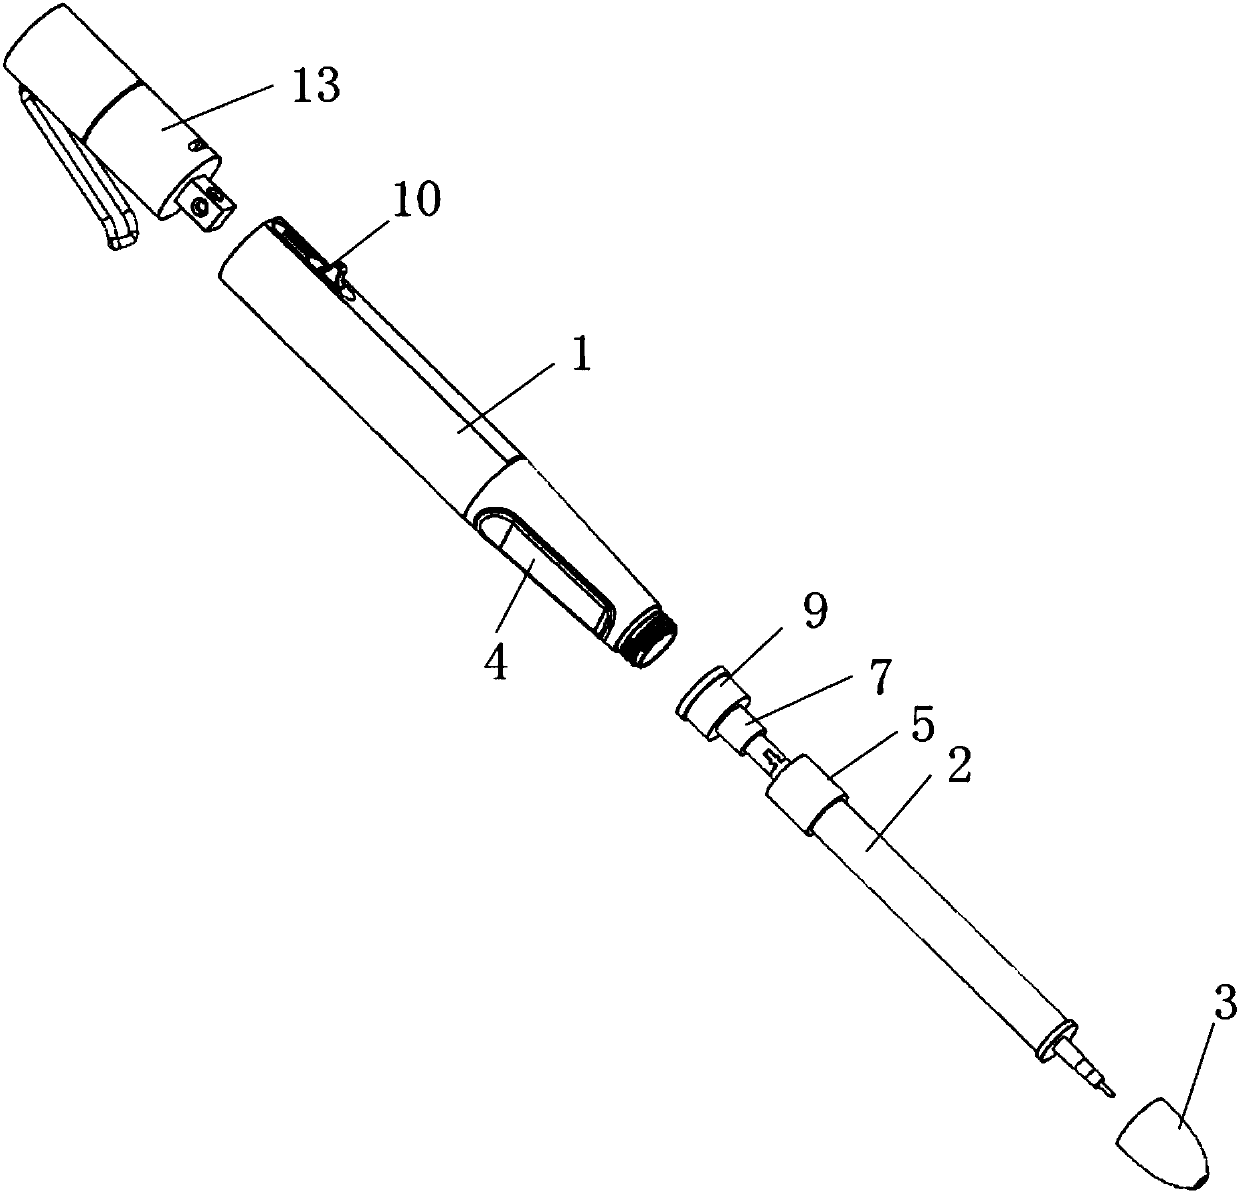 Portable pressure-sensitive scanning and projecting pen